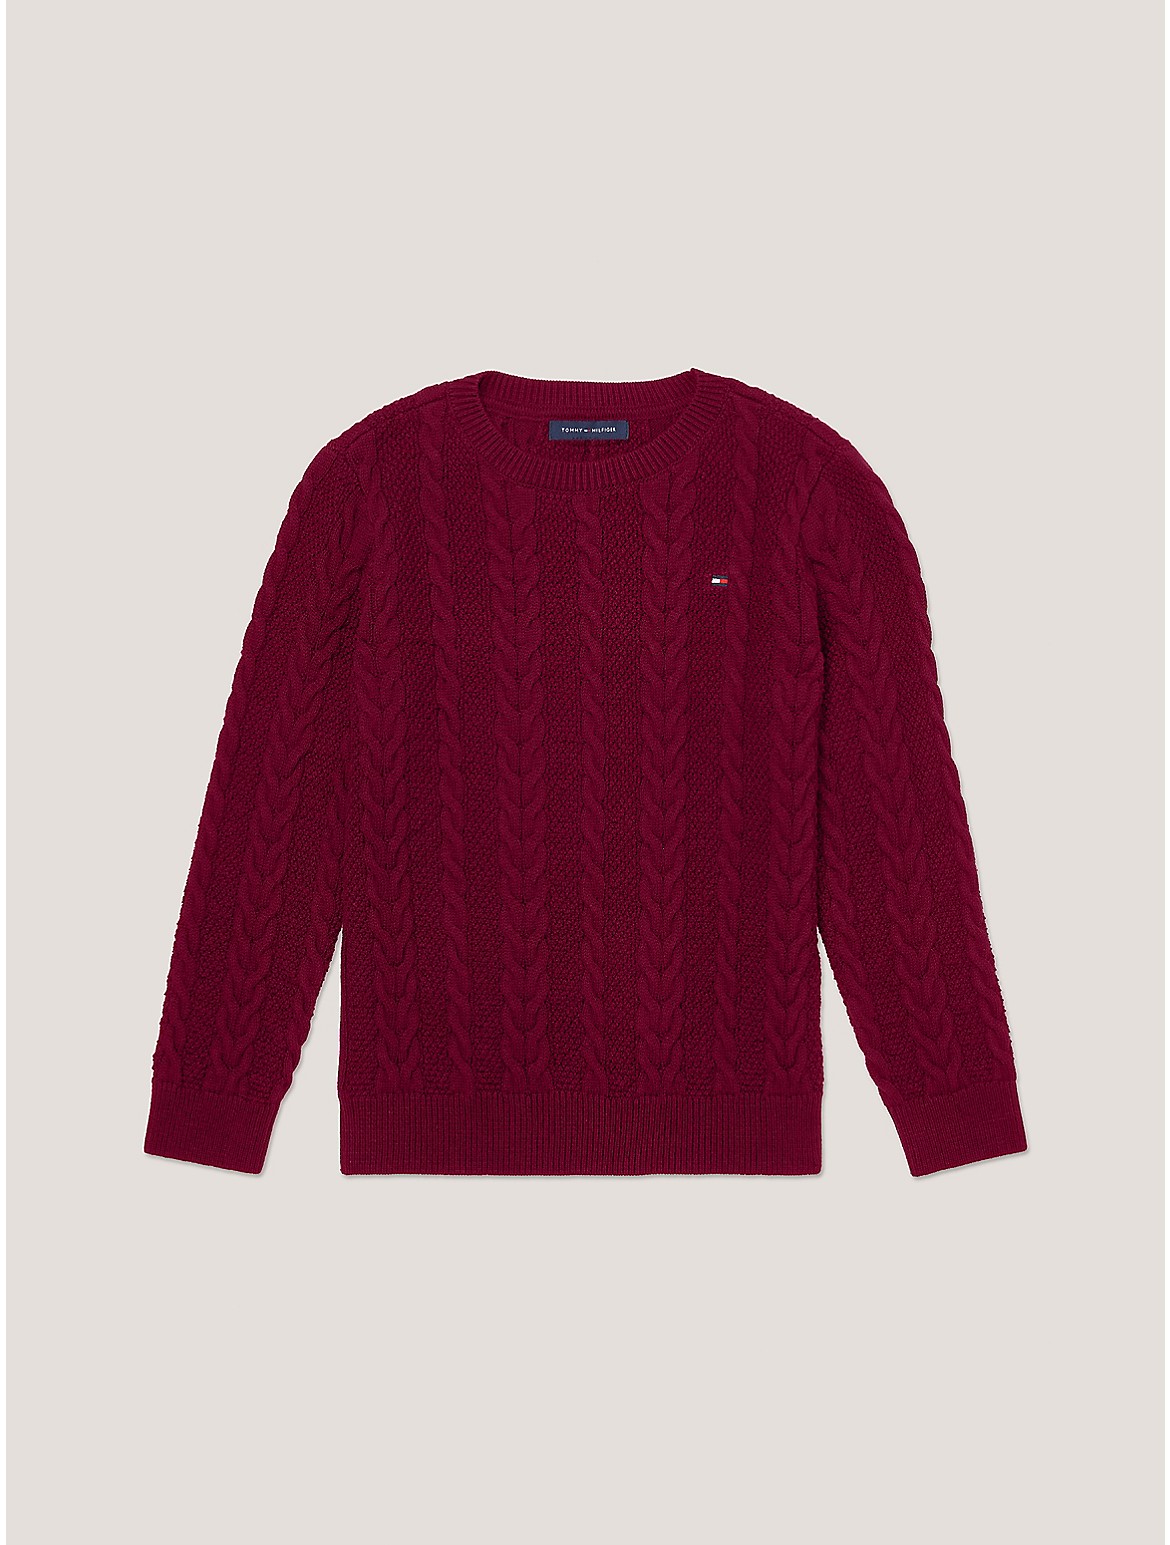 Tommy Hilfiger Boys' Kids' Cable Knit Sweater - Red - XS